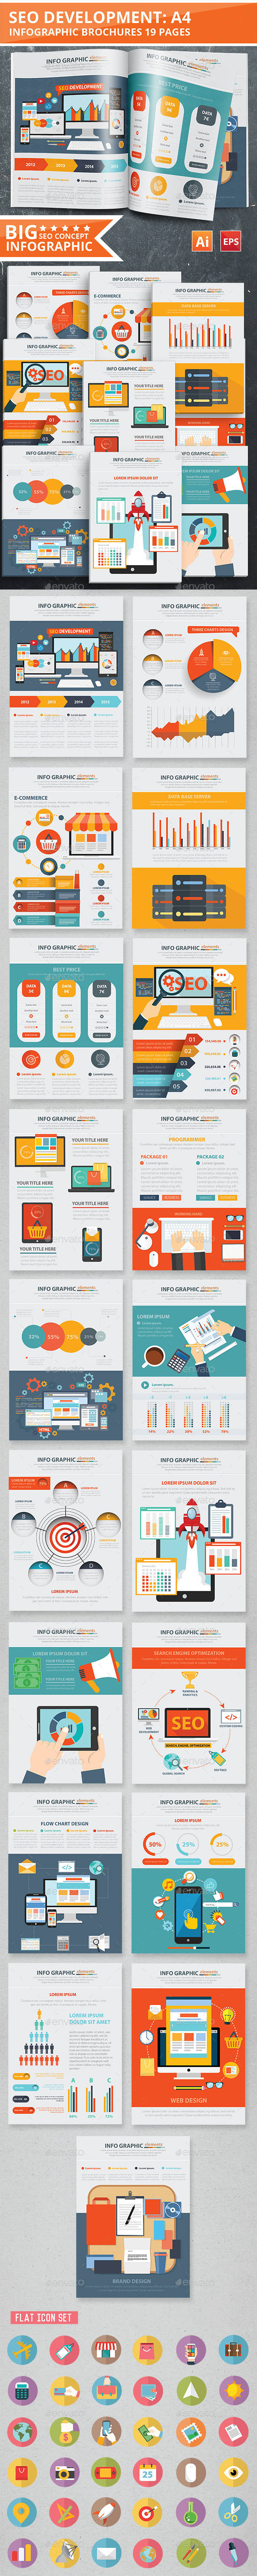 SEO Development Infographic Design 19 Pages